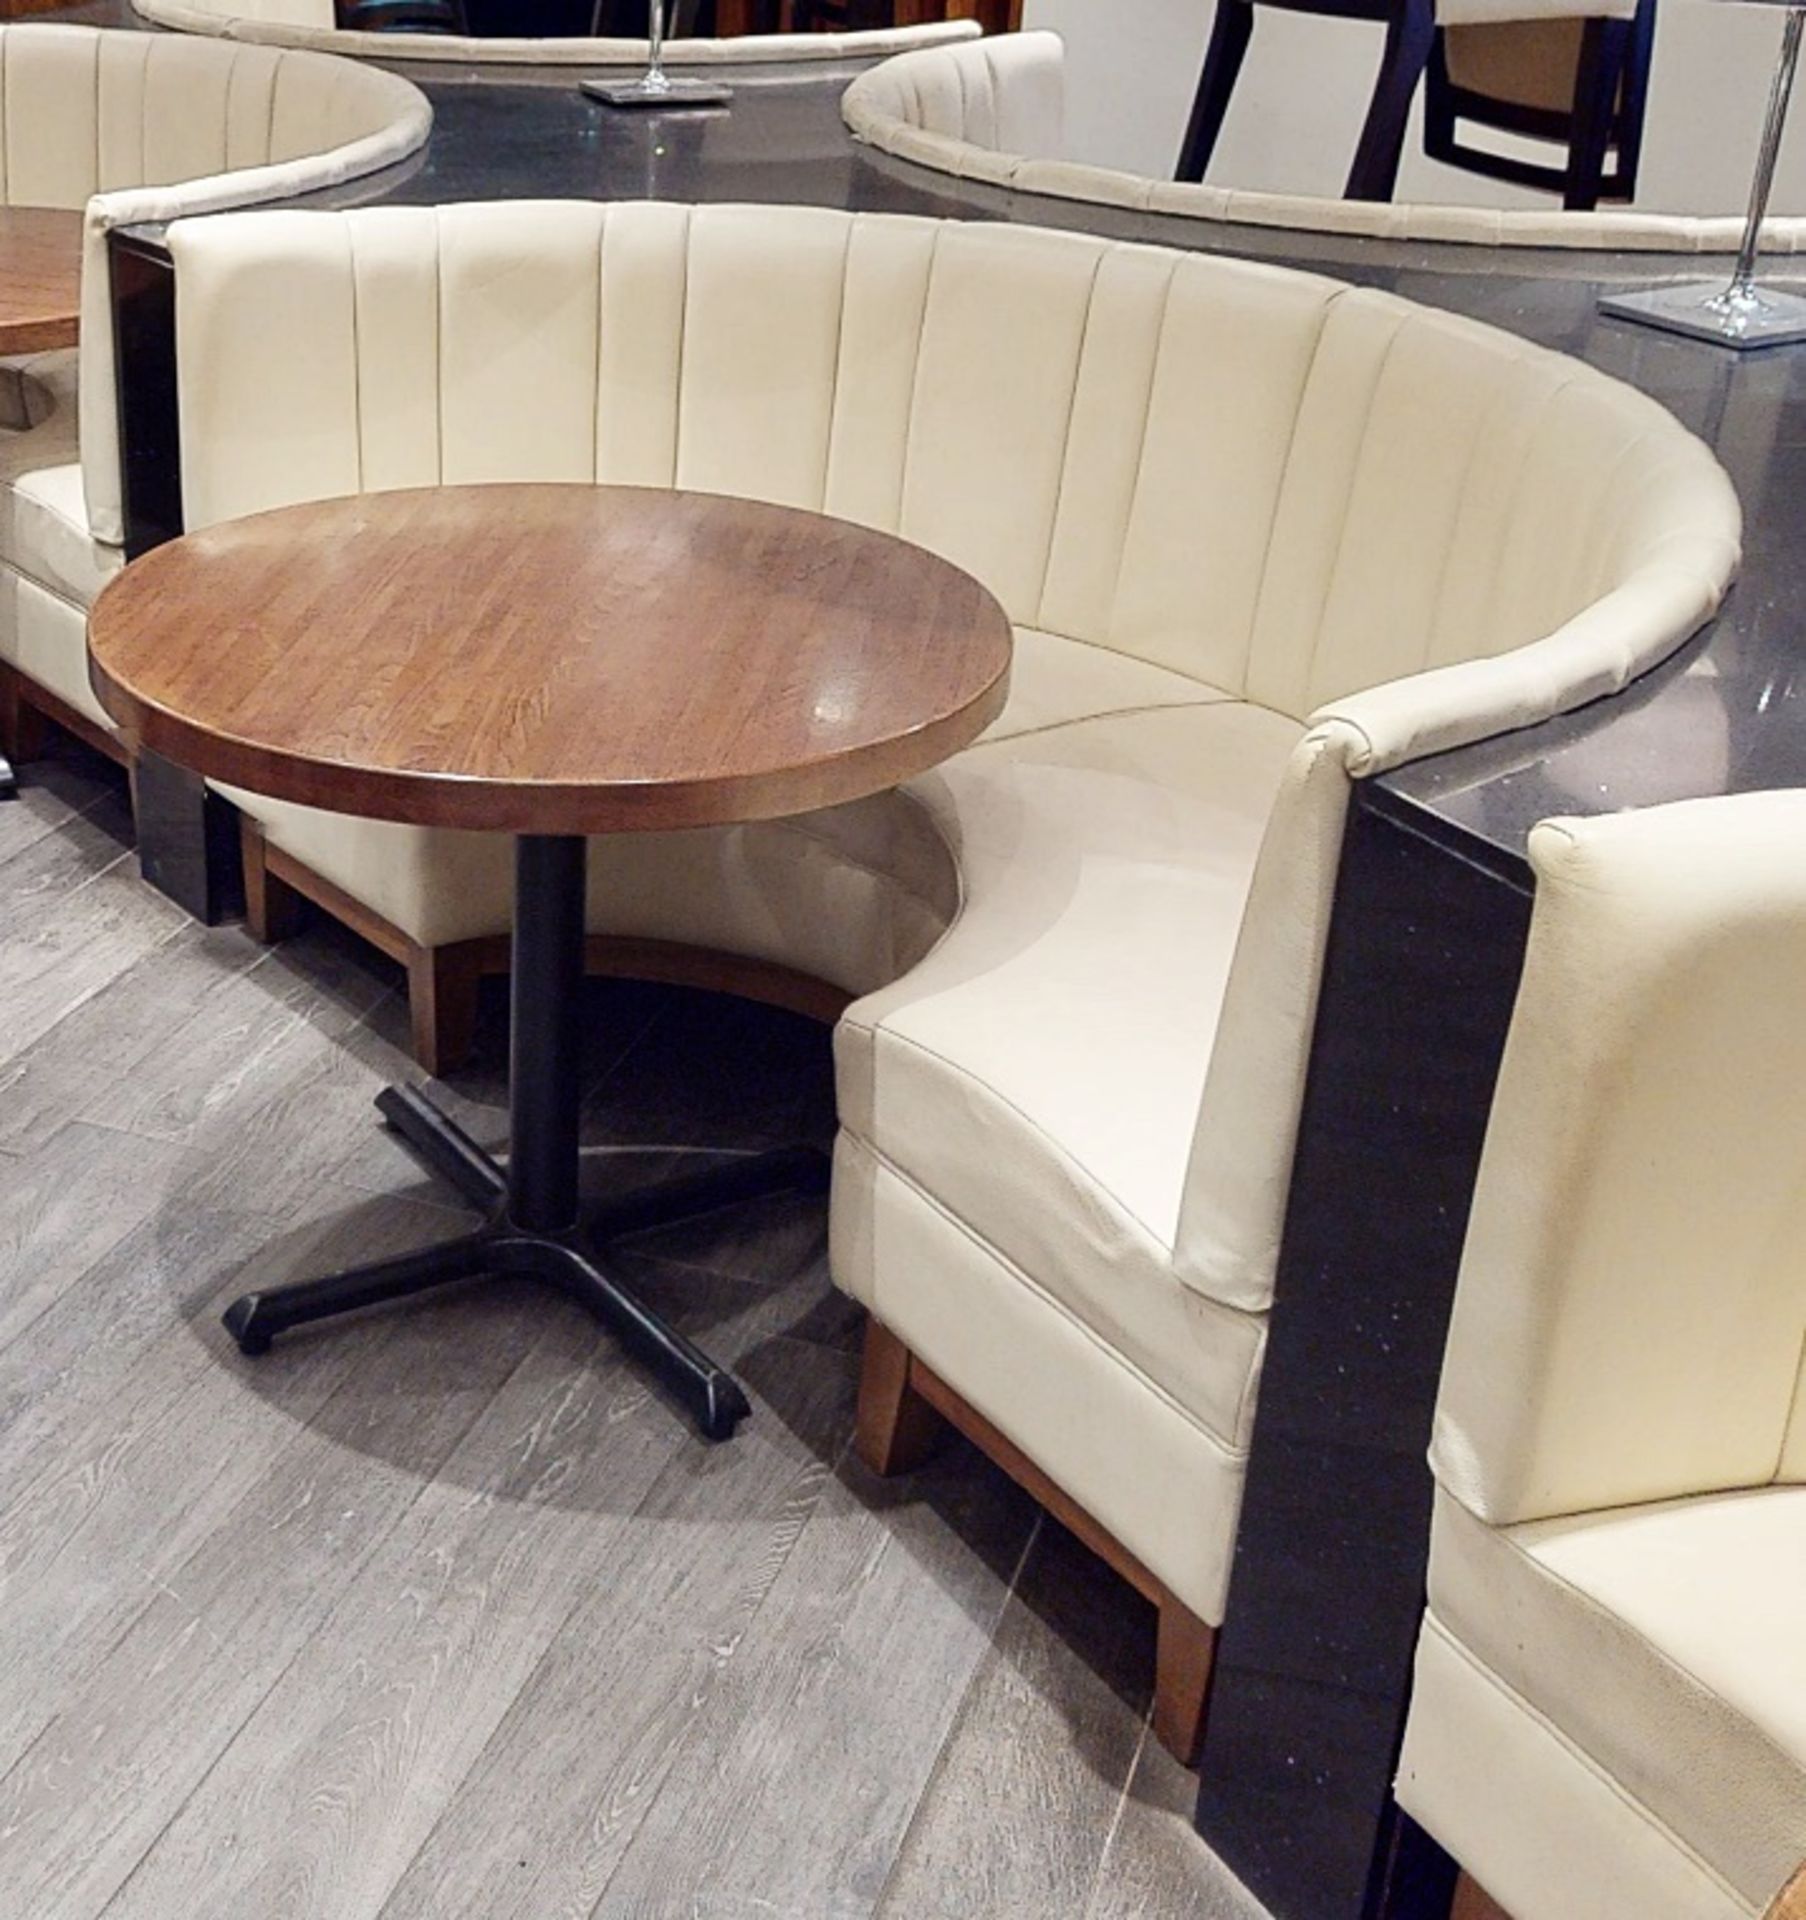 1 x Restaurant C-Shaped Seating Booth, Upholstered In A Cream Faux Leather, With A Pleated High Back - Image 2 of 2